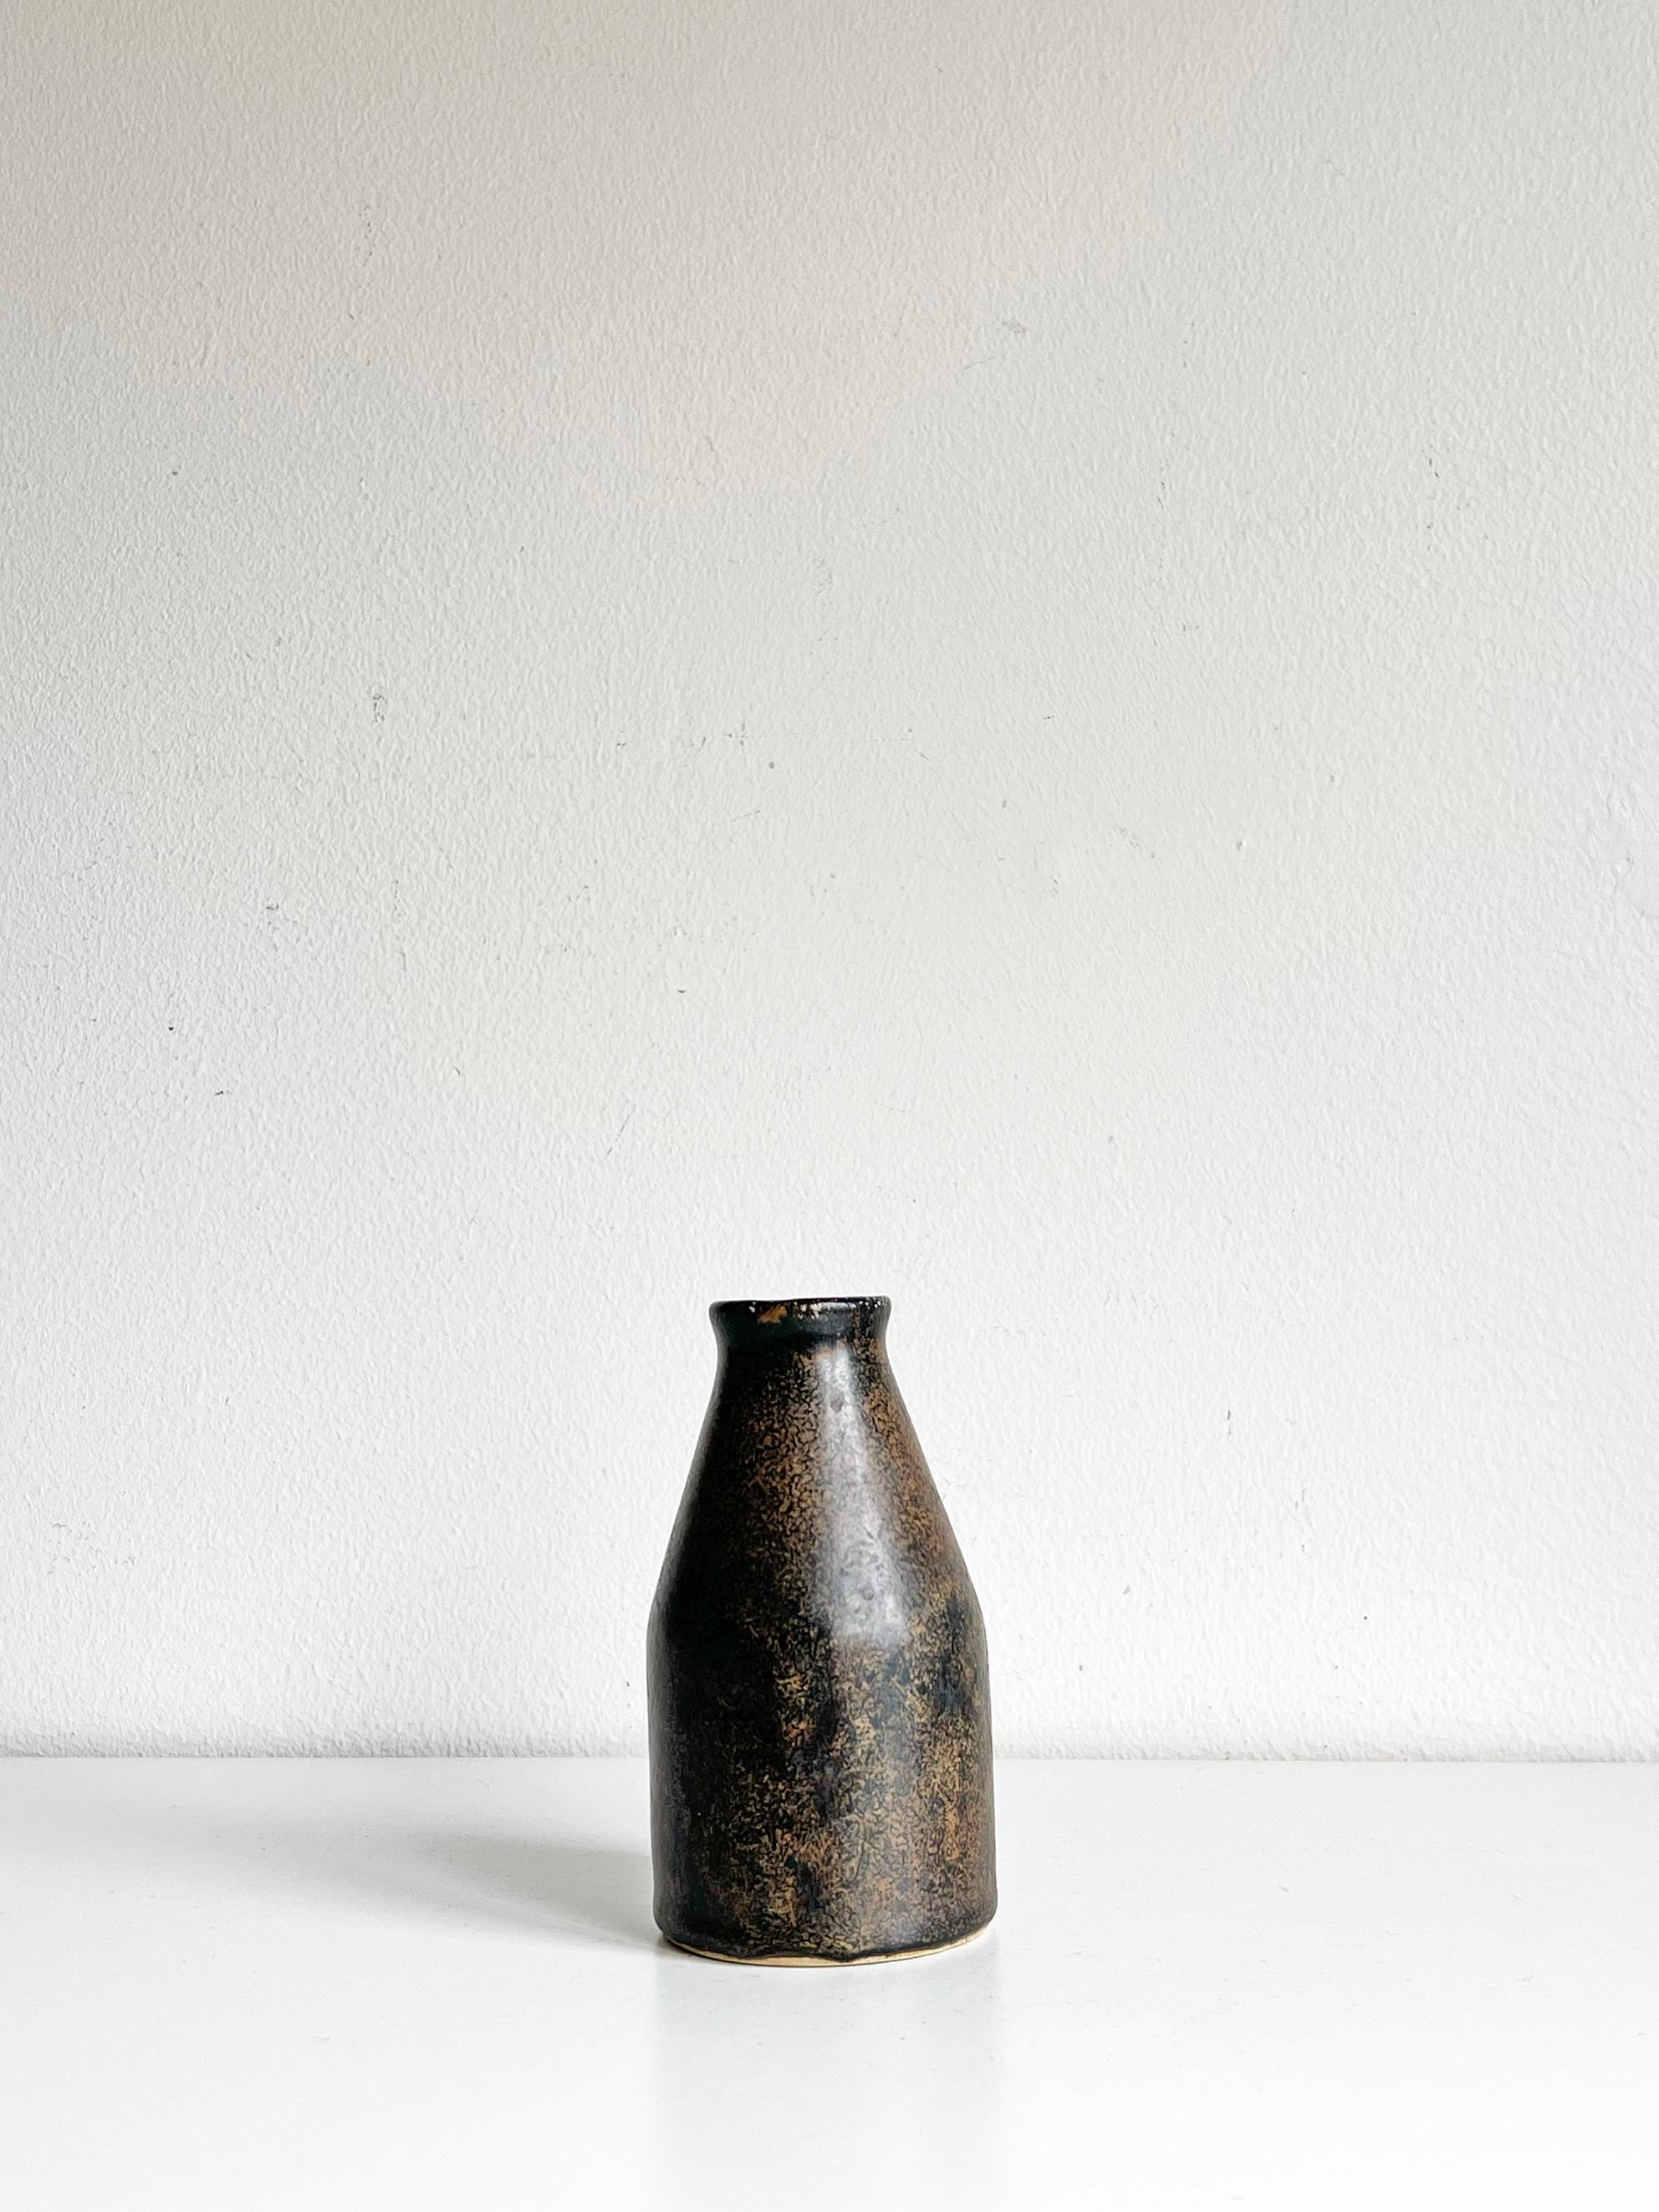 A stoneware vase designed by Carl-Harry Stålhane for Rörstrand, most likely produced in 1960s. 
From the rare production series at Rörstands named 